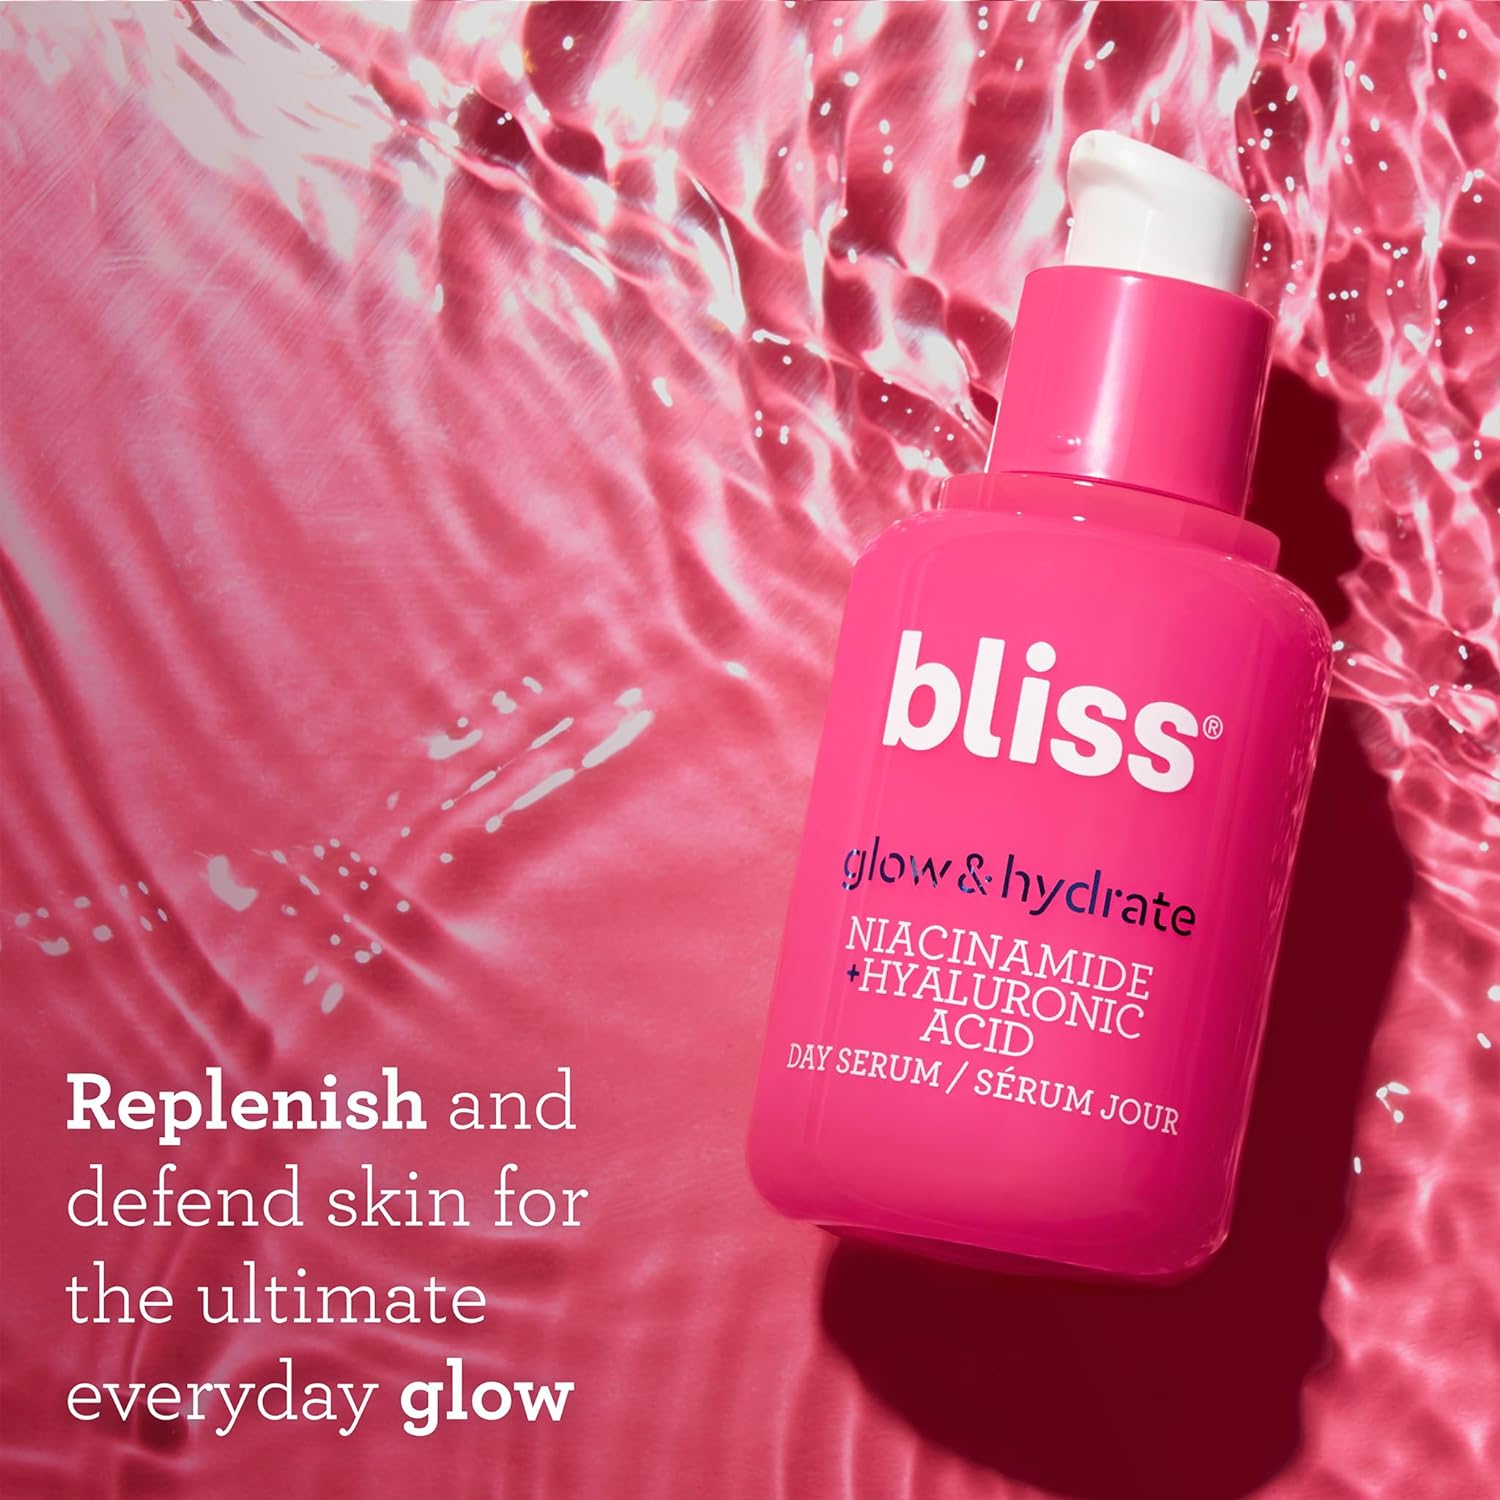 Buy Bliss Glow & Hydrate Serum - Niacinamide + Hyaluronic Acid Serum - 1 Fl Oz - Improves Dullness, Hydrates, Replenishes & Defends Skin - Lightweight Hydration - Clean - Vegan & Cruelty Free on Amazon.com ? FREE SHIPPING on qualified orders